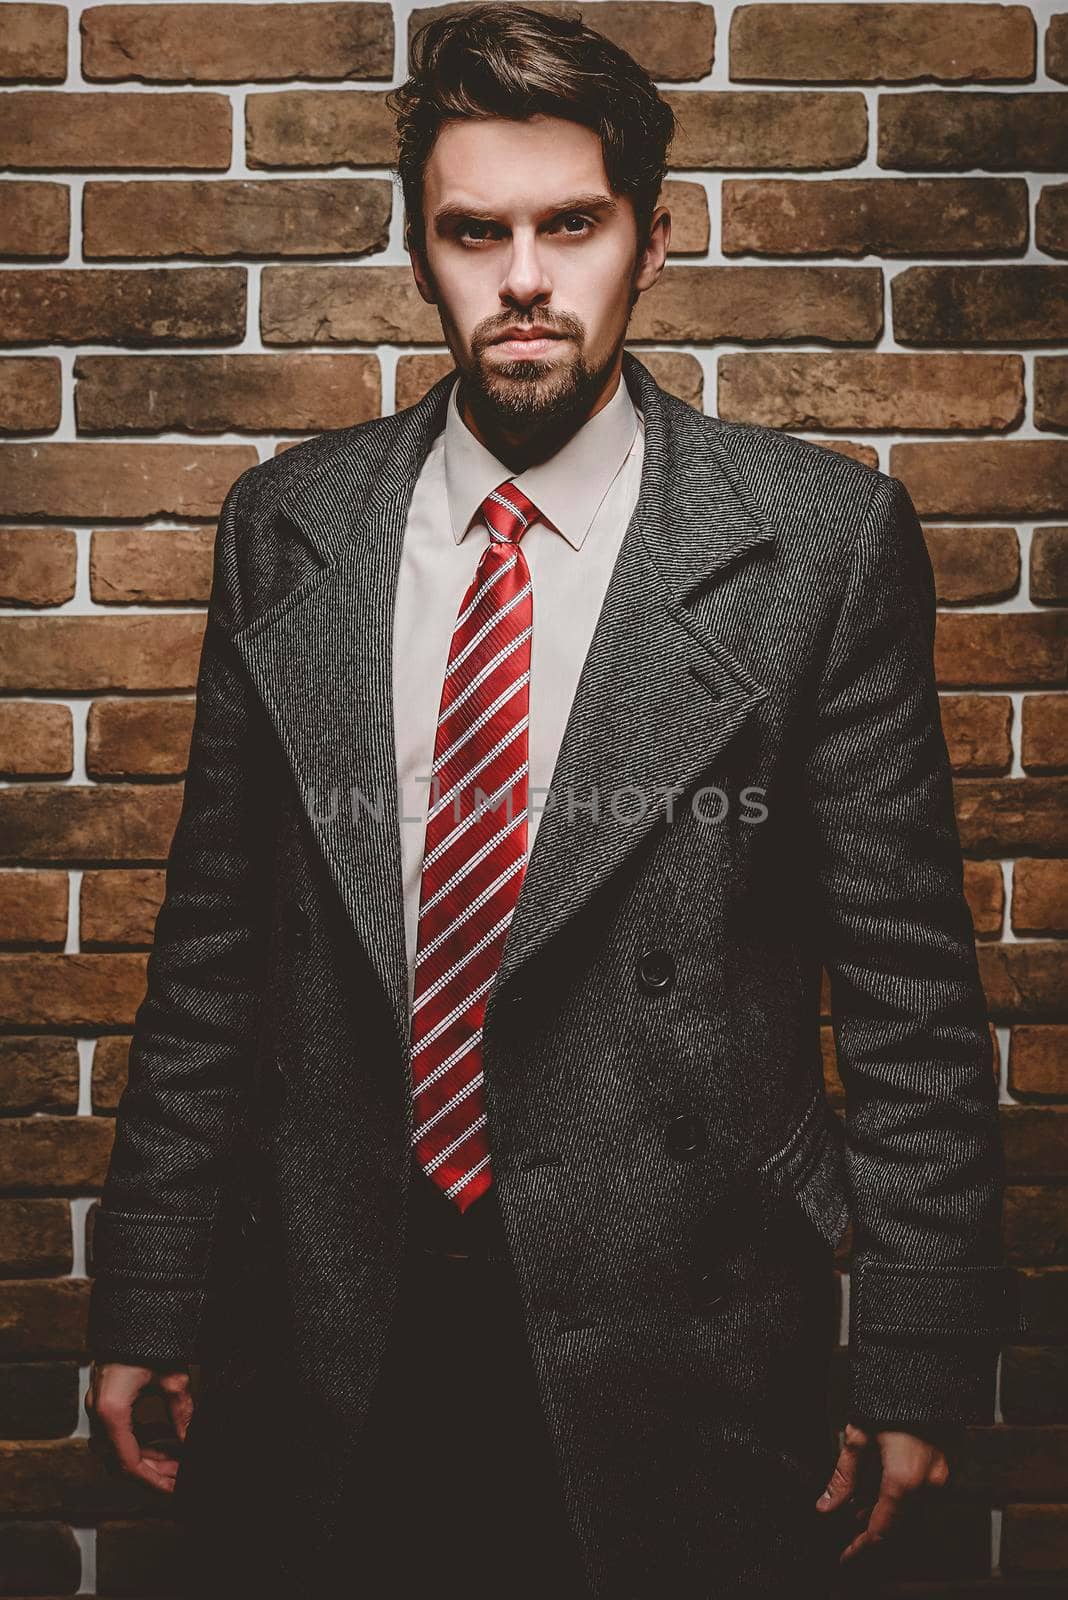 Portrait of fashionable well dressed man with beard posing outdoors looking away, confident and focused mature man in coat standing on a brick wall background, elegant fashion model.